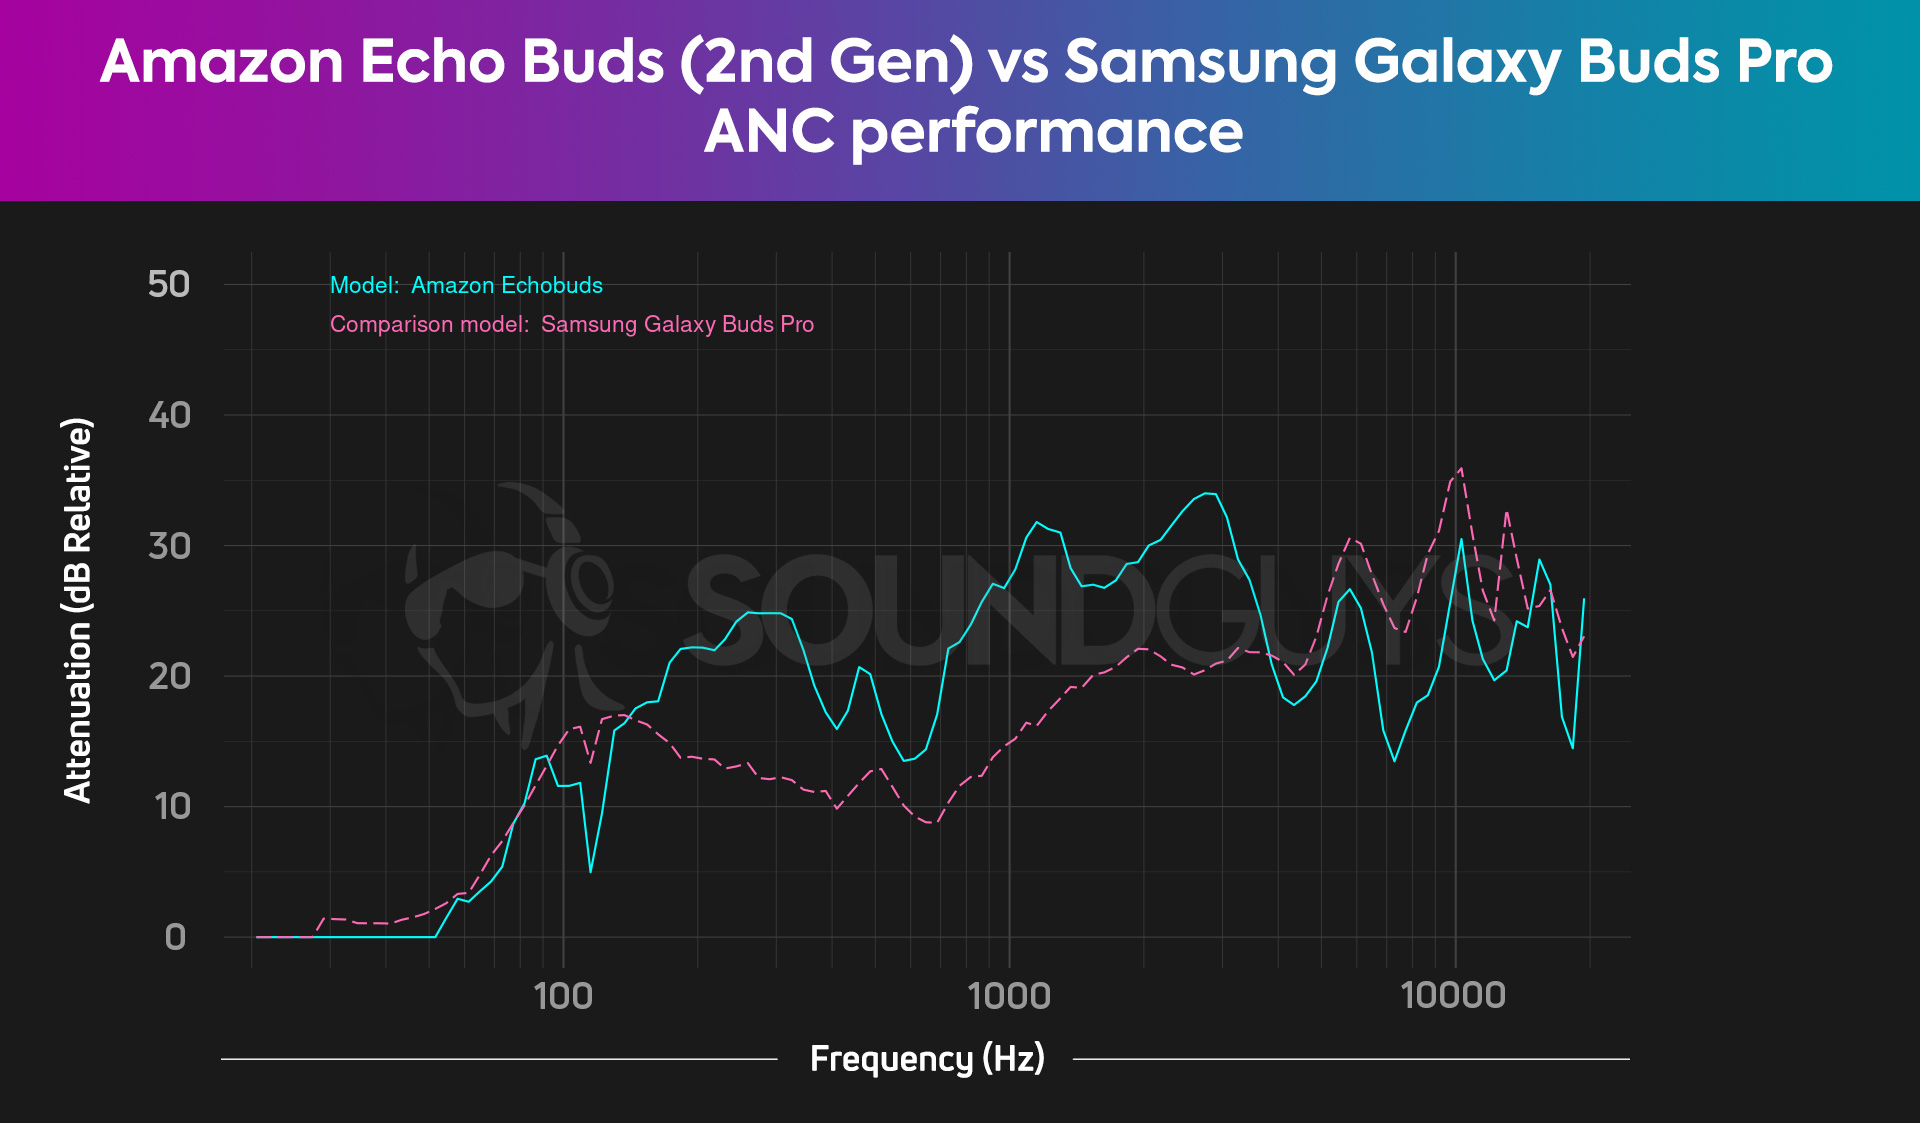 Amazon Echo Buds 2nd Gen vs Samsung Galaxy Buds Pro combined ANC and isolation performances compared to one another.